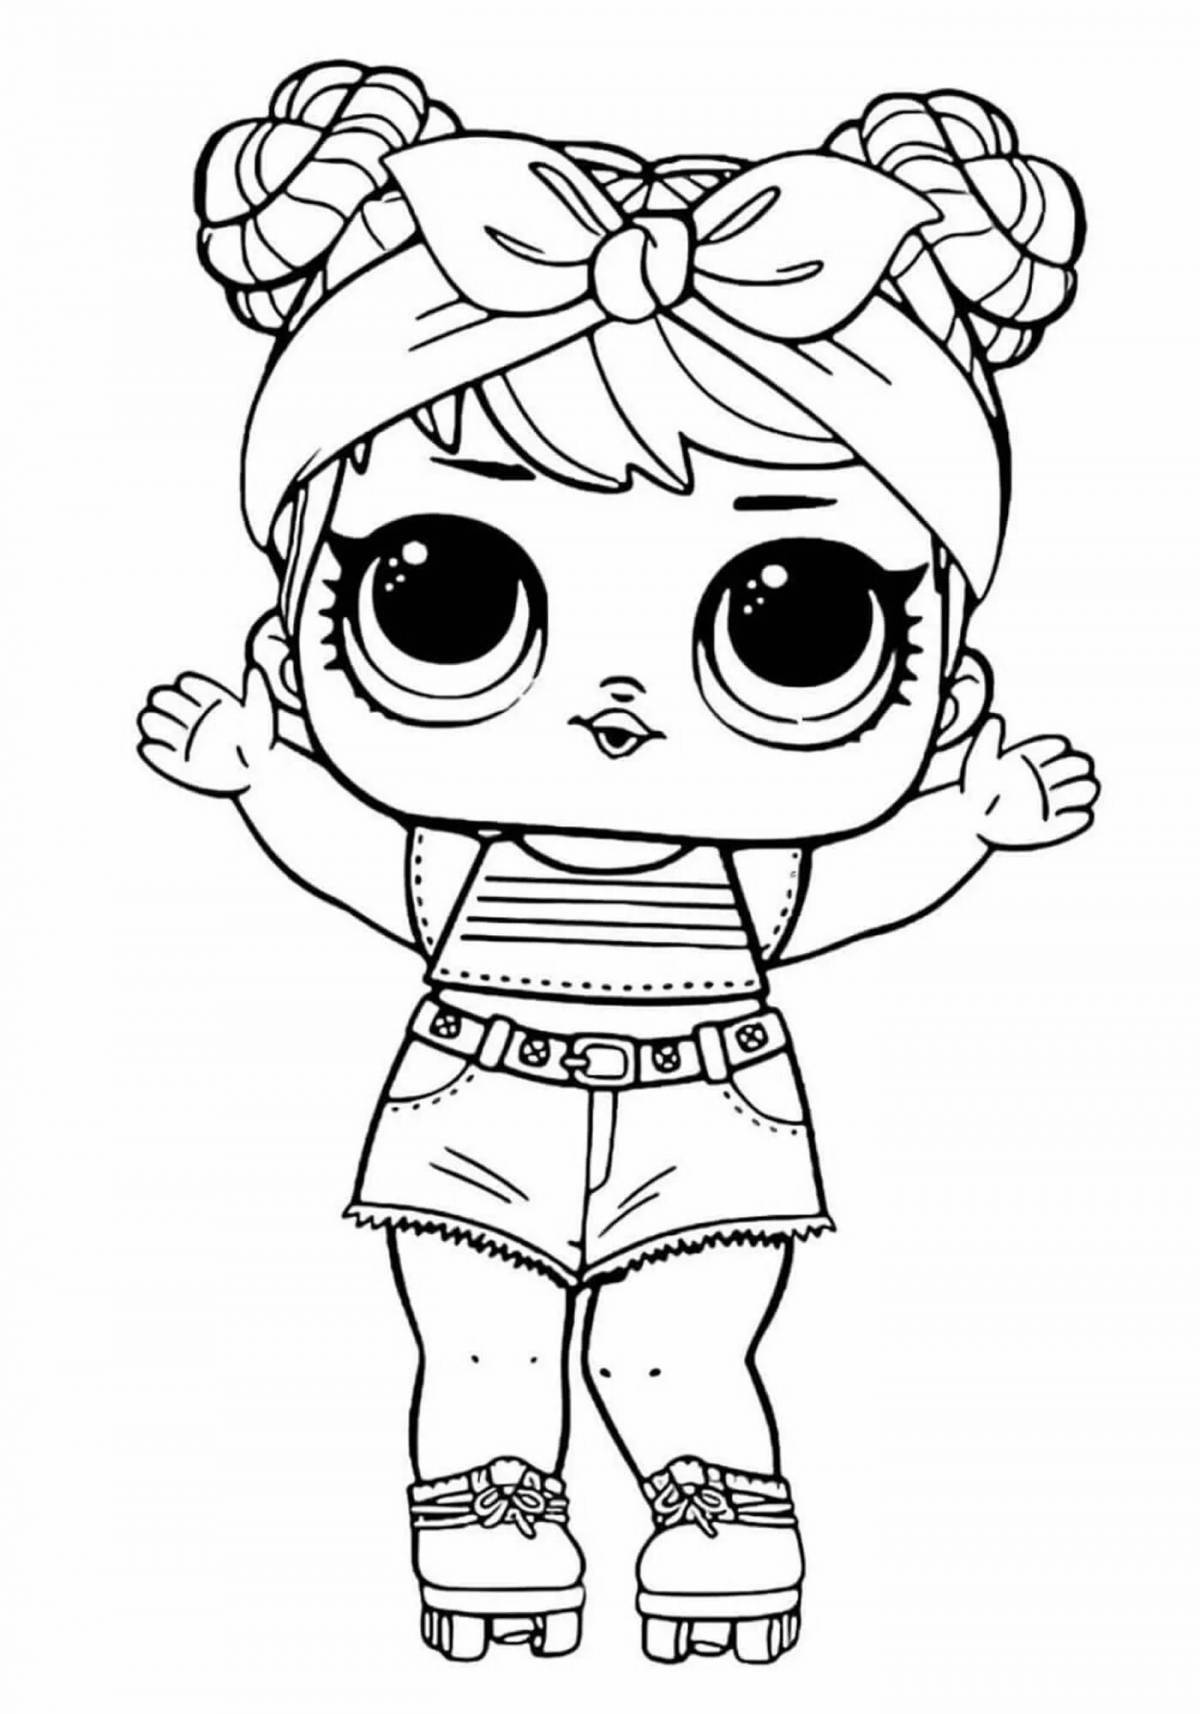 Vivacious coloring page lol doll coloring book